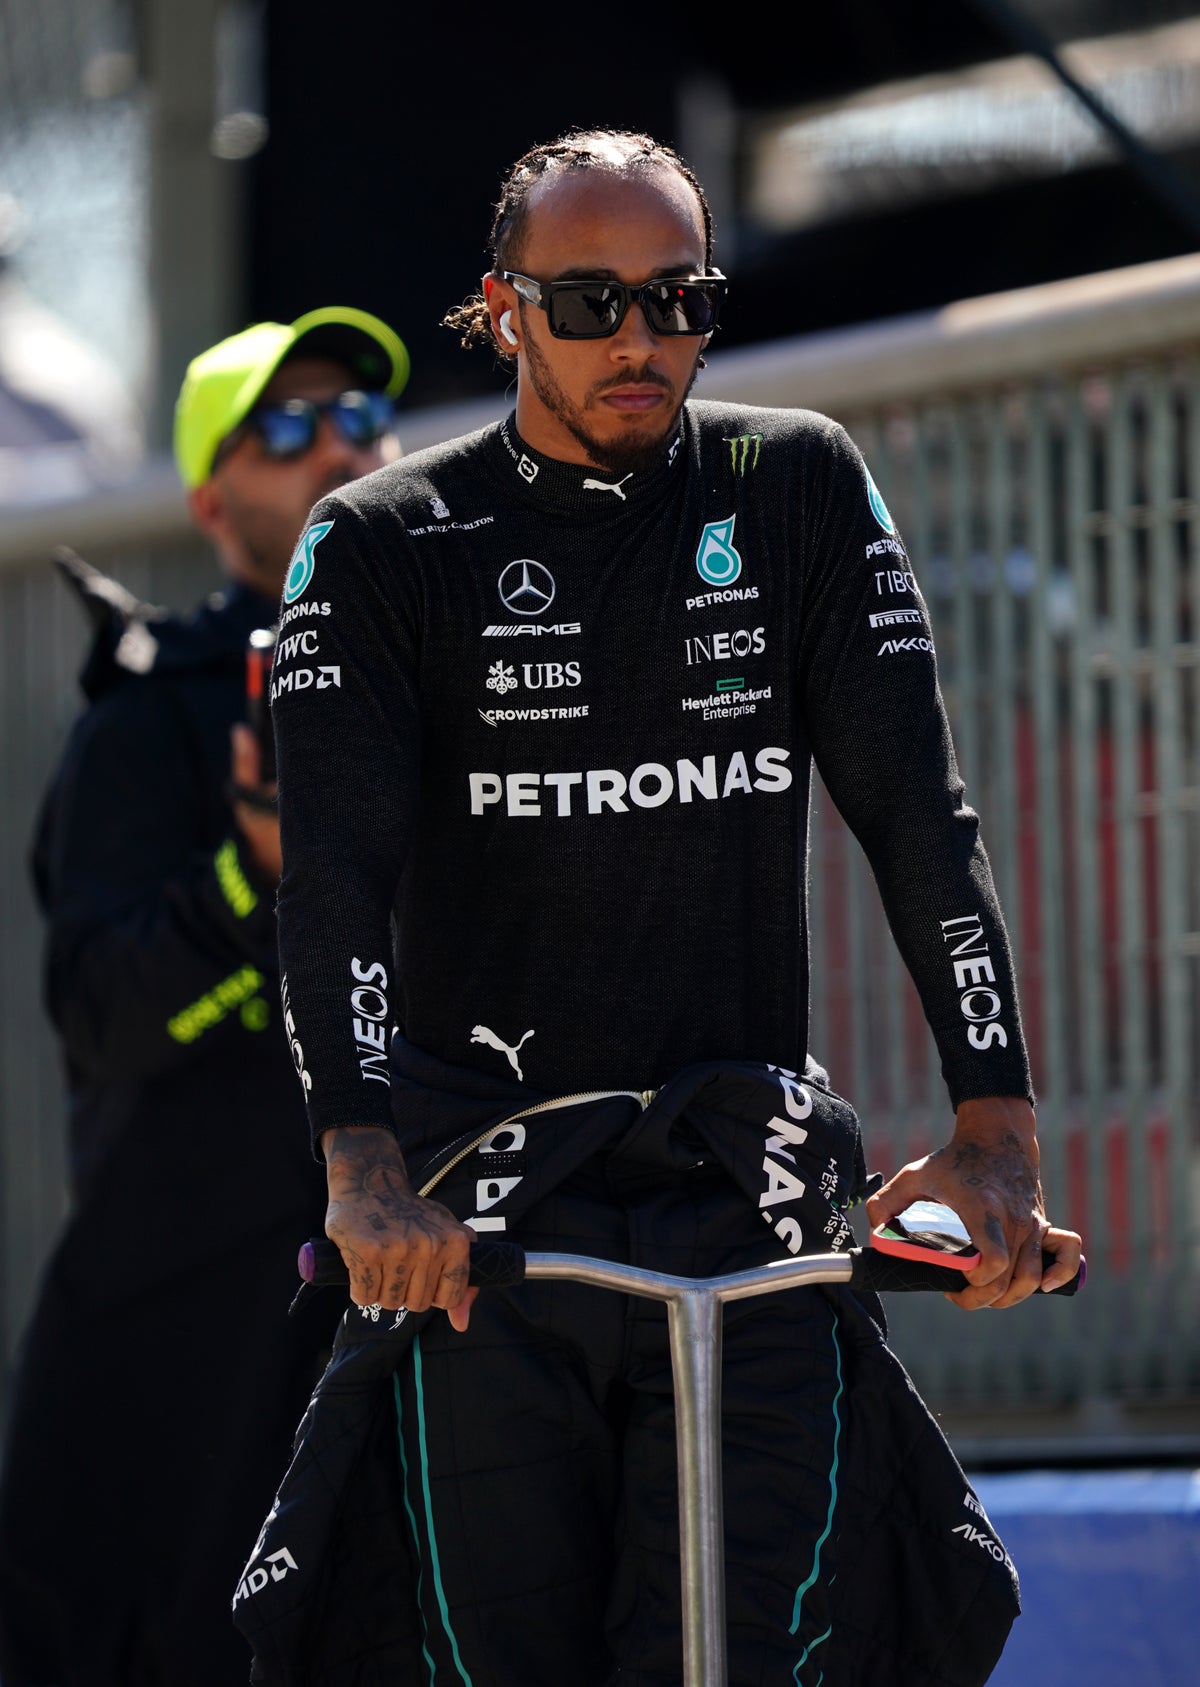 Lewis Hamilton fears first winless season due to ‘almost unbeatable’ Red Bull